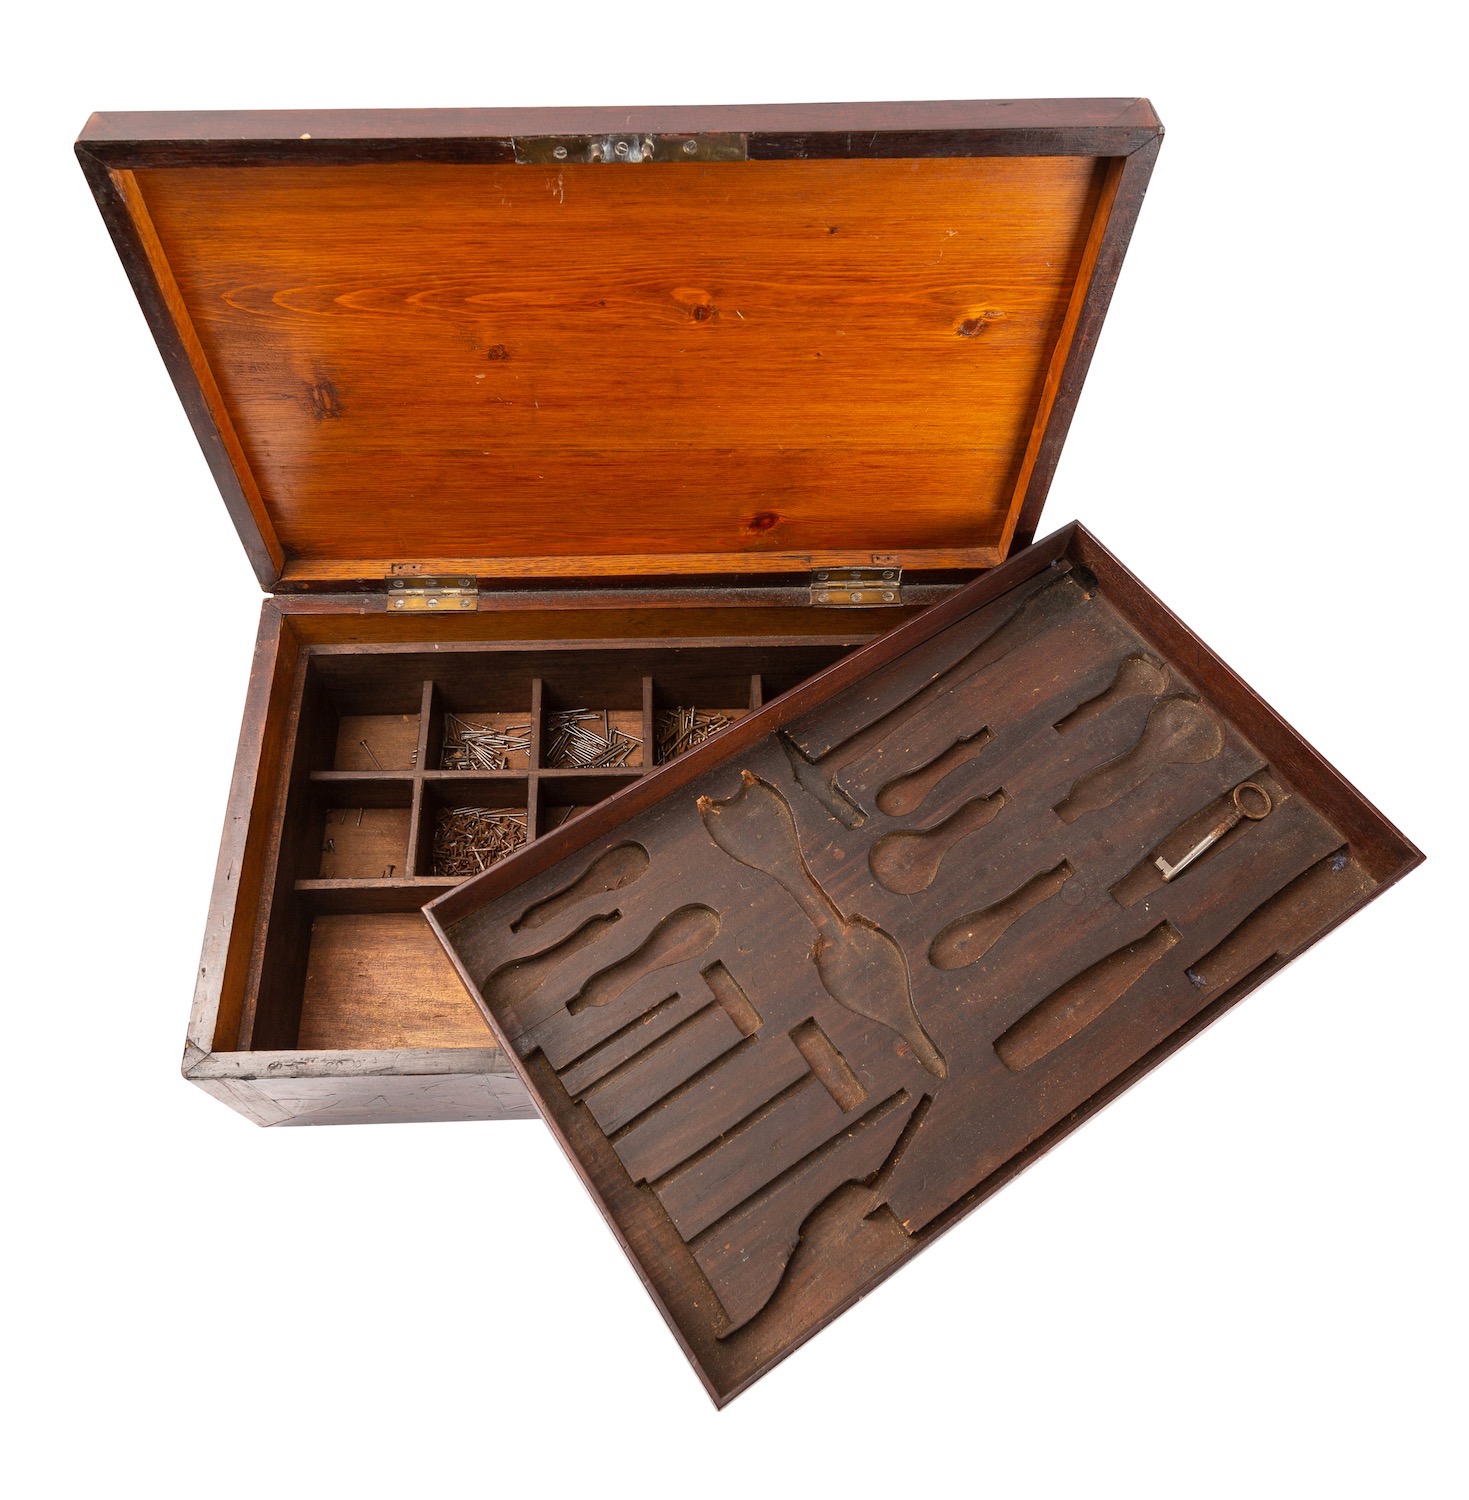 A George III marquetry and parquetry worked mahogany tool box, - Image 2 of 4